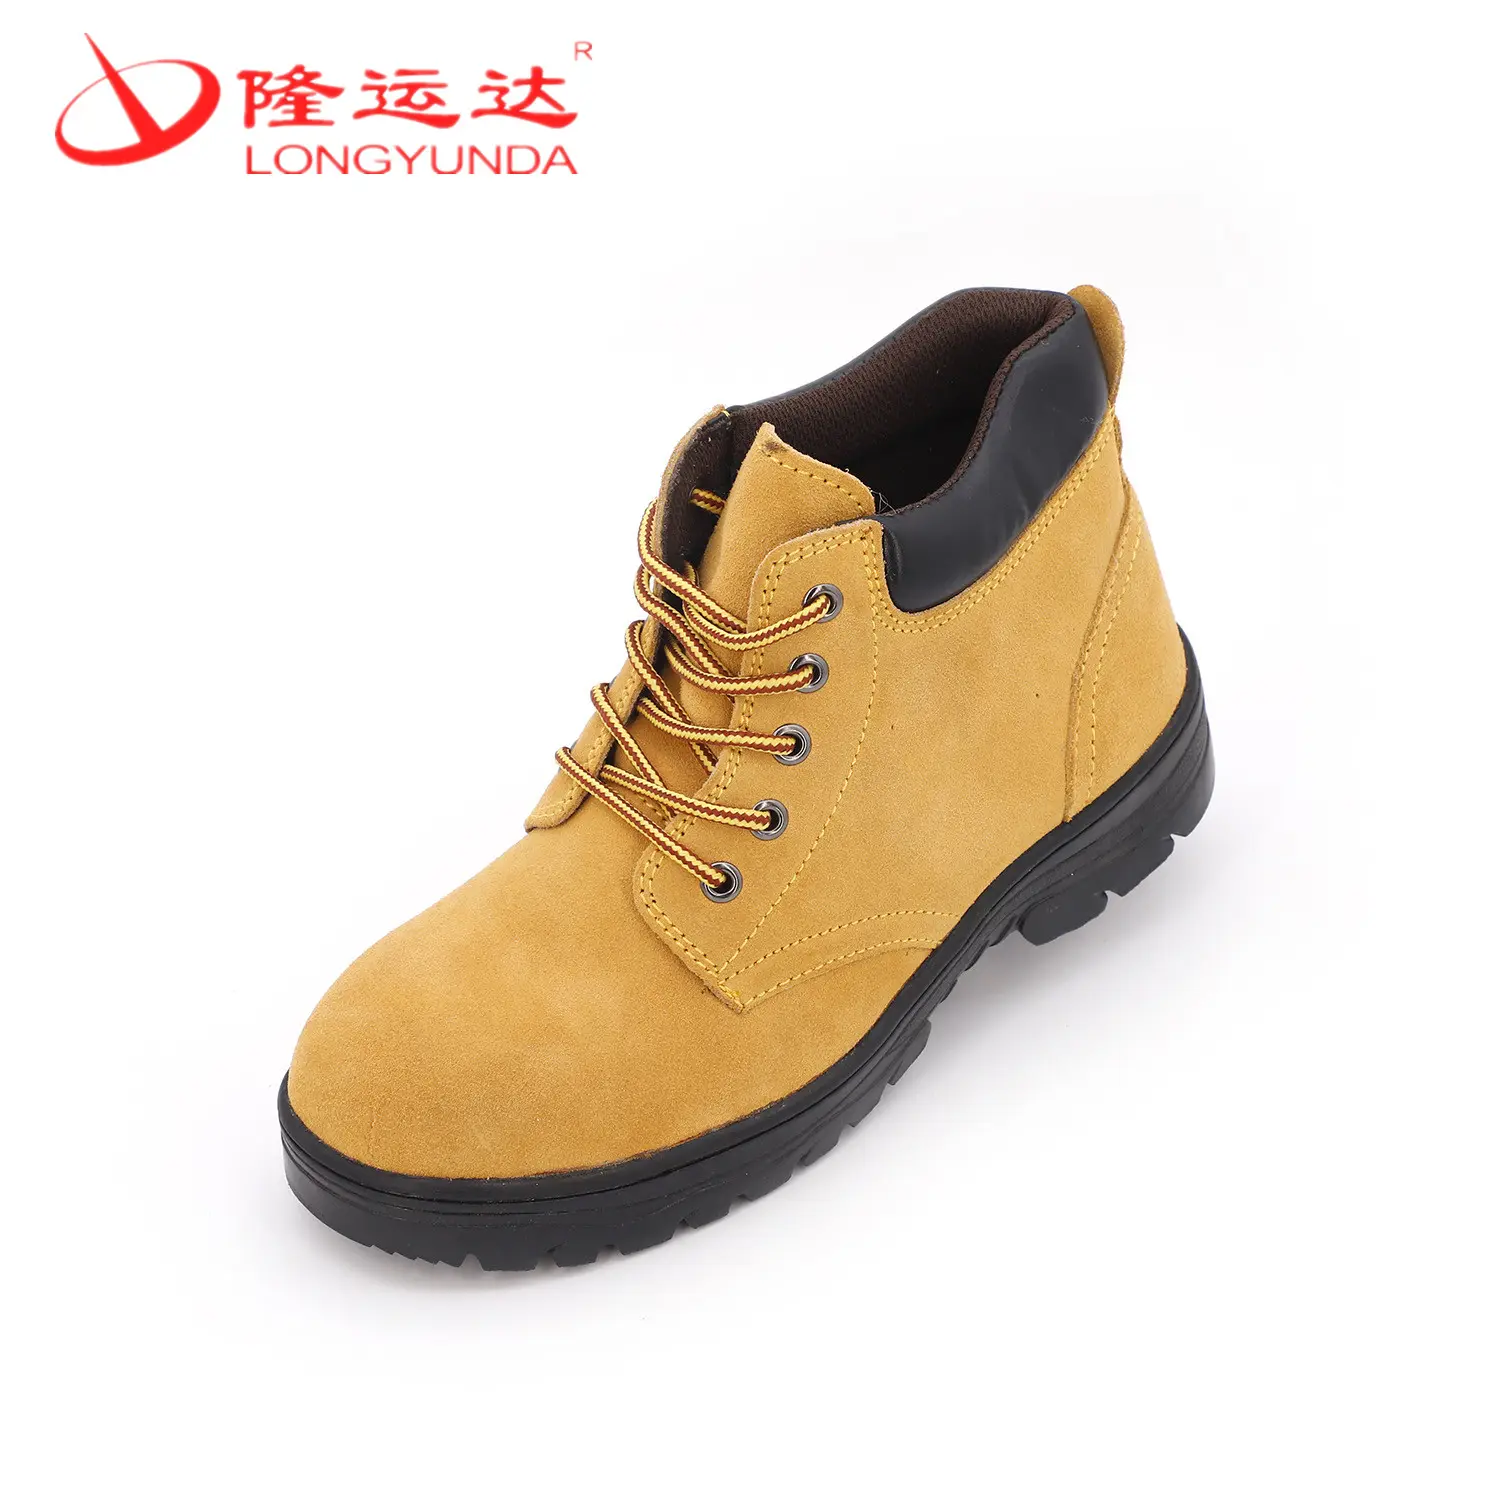 Hot Sale High Quality CE Certificate Suede Leather Men Construction Boots/safety shoes men